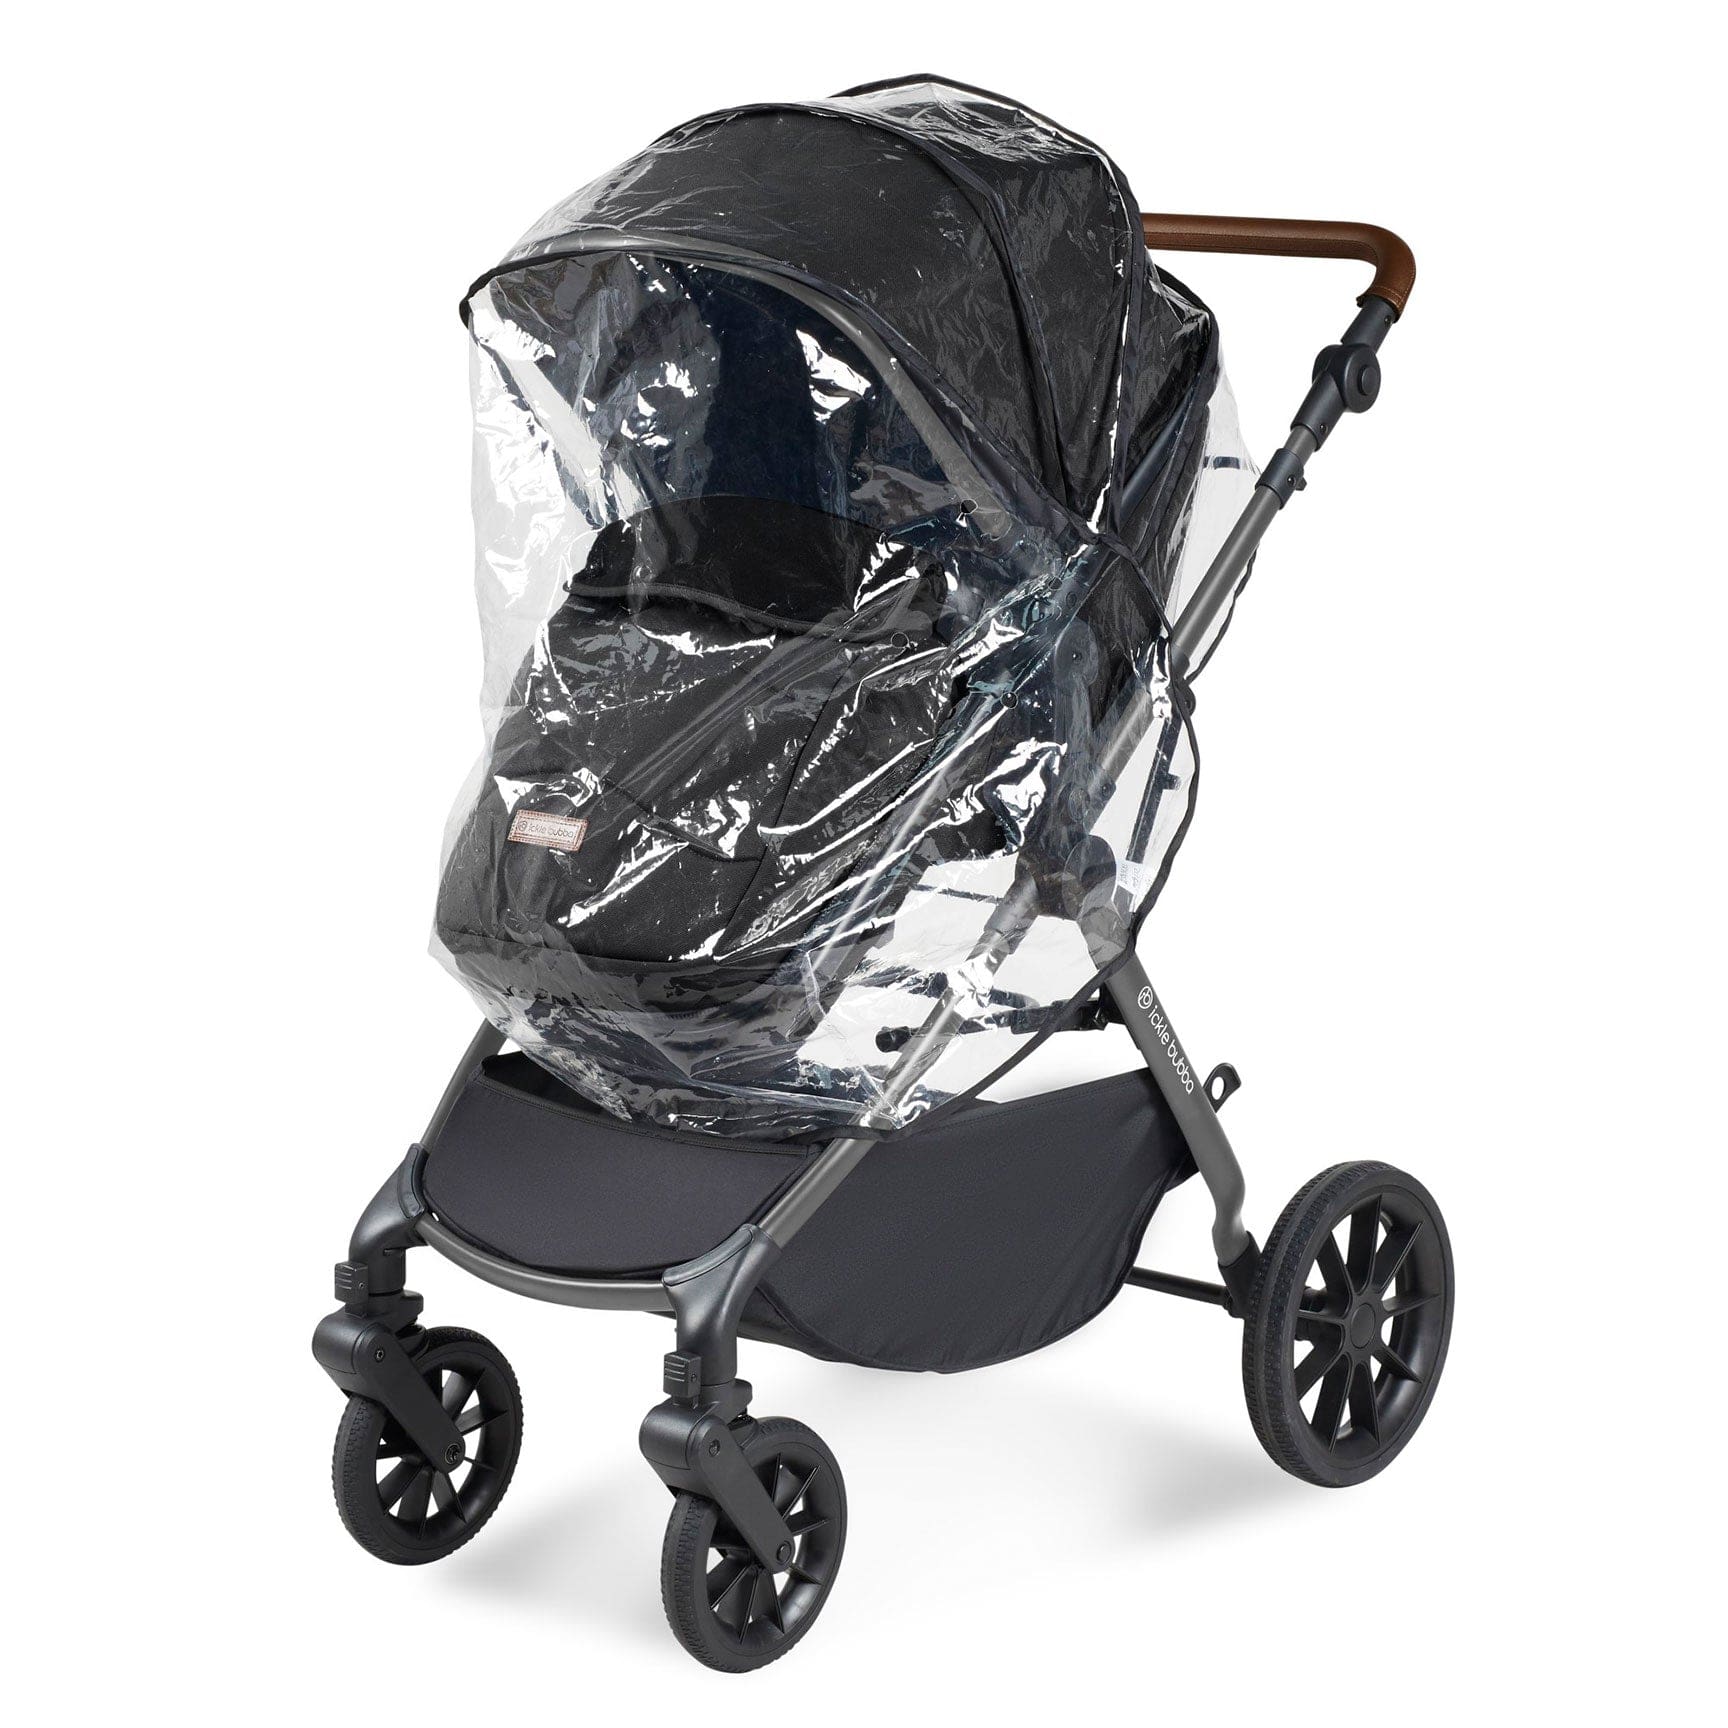 Ickle Bubba travel systems Ickle Bubba Cosmo 2 in 1 Plus Carrycot & Pushchair - Gun metal/Black 10-007-001-135